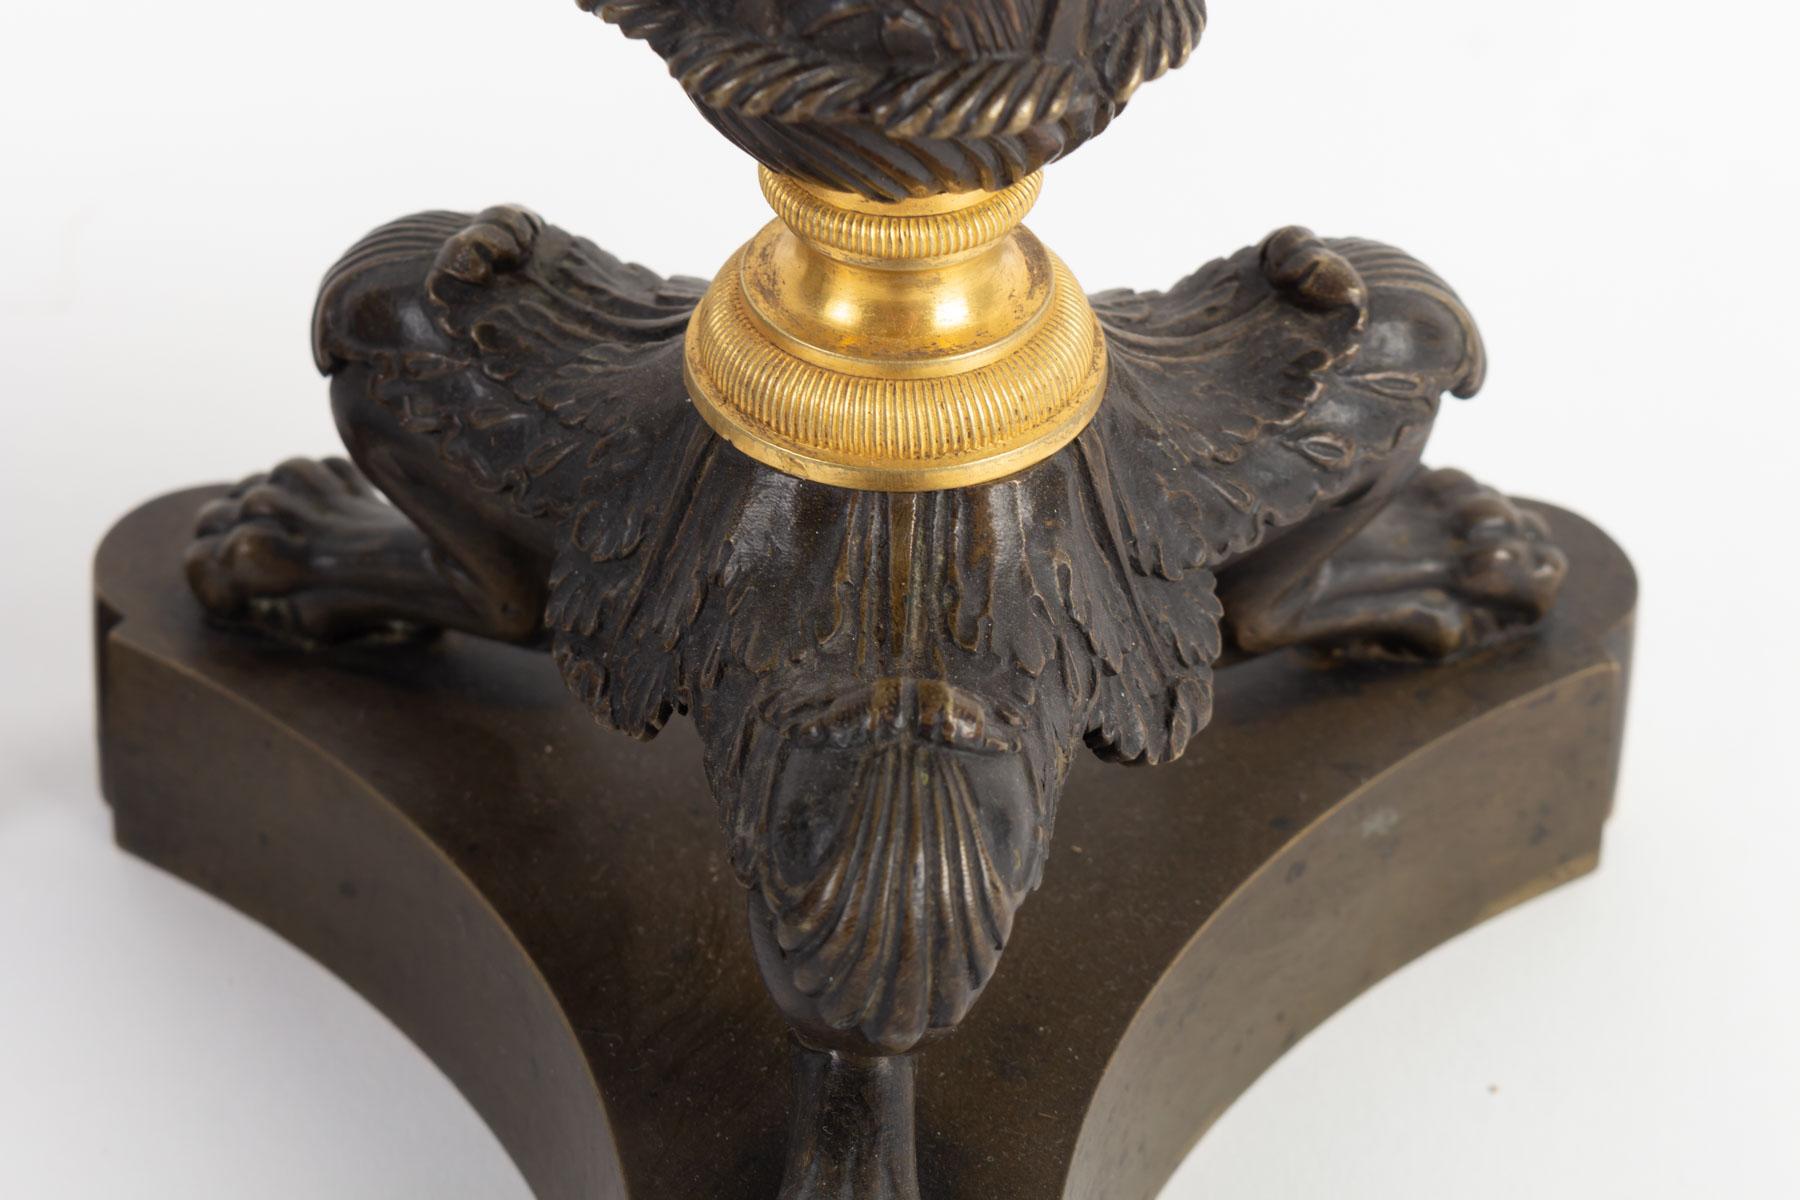 Pair of large candleholders in bronze with an antique black Patina. Details in gilded bronze. Restoratione Period, 1820s-1830s.
Measures: H 36 cm, D 15 cm.